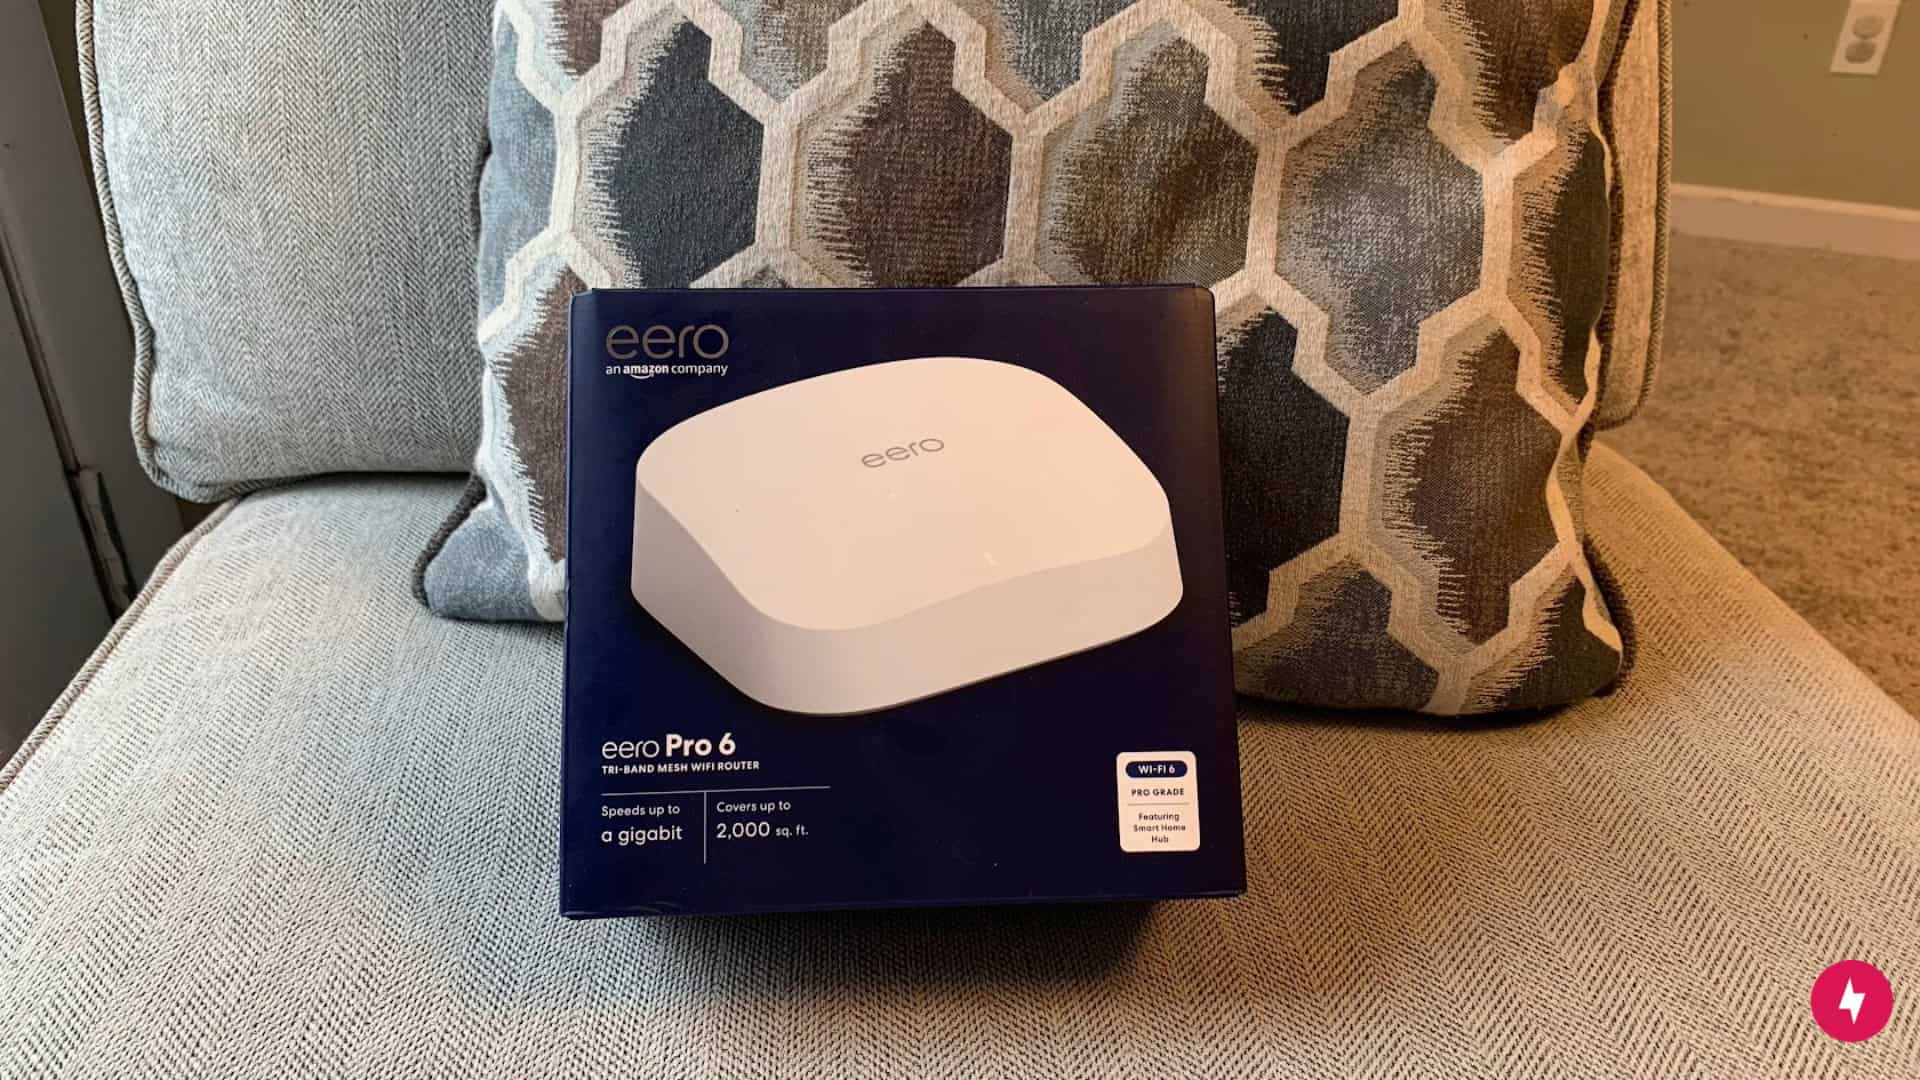 The front of the box of an Eero Pro 6 device.